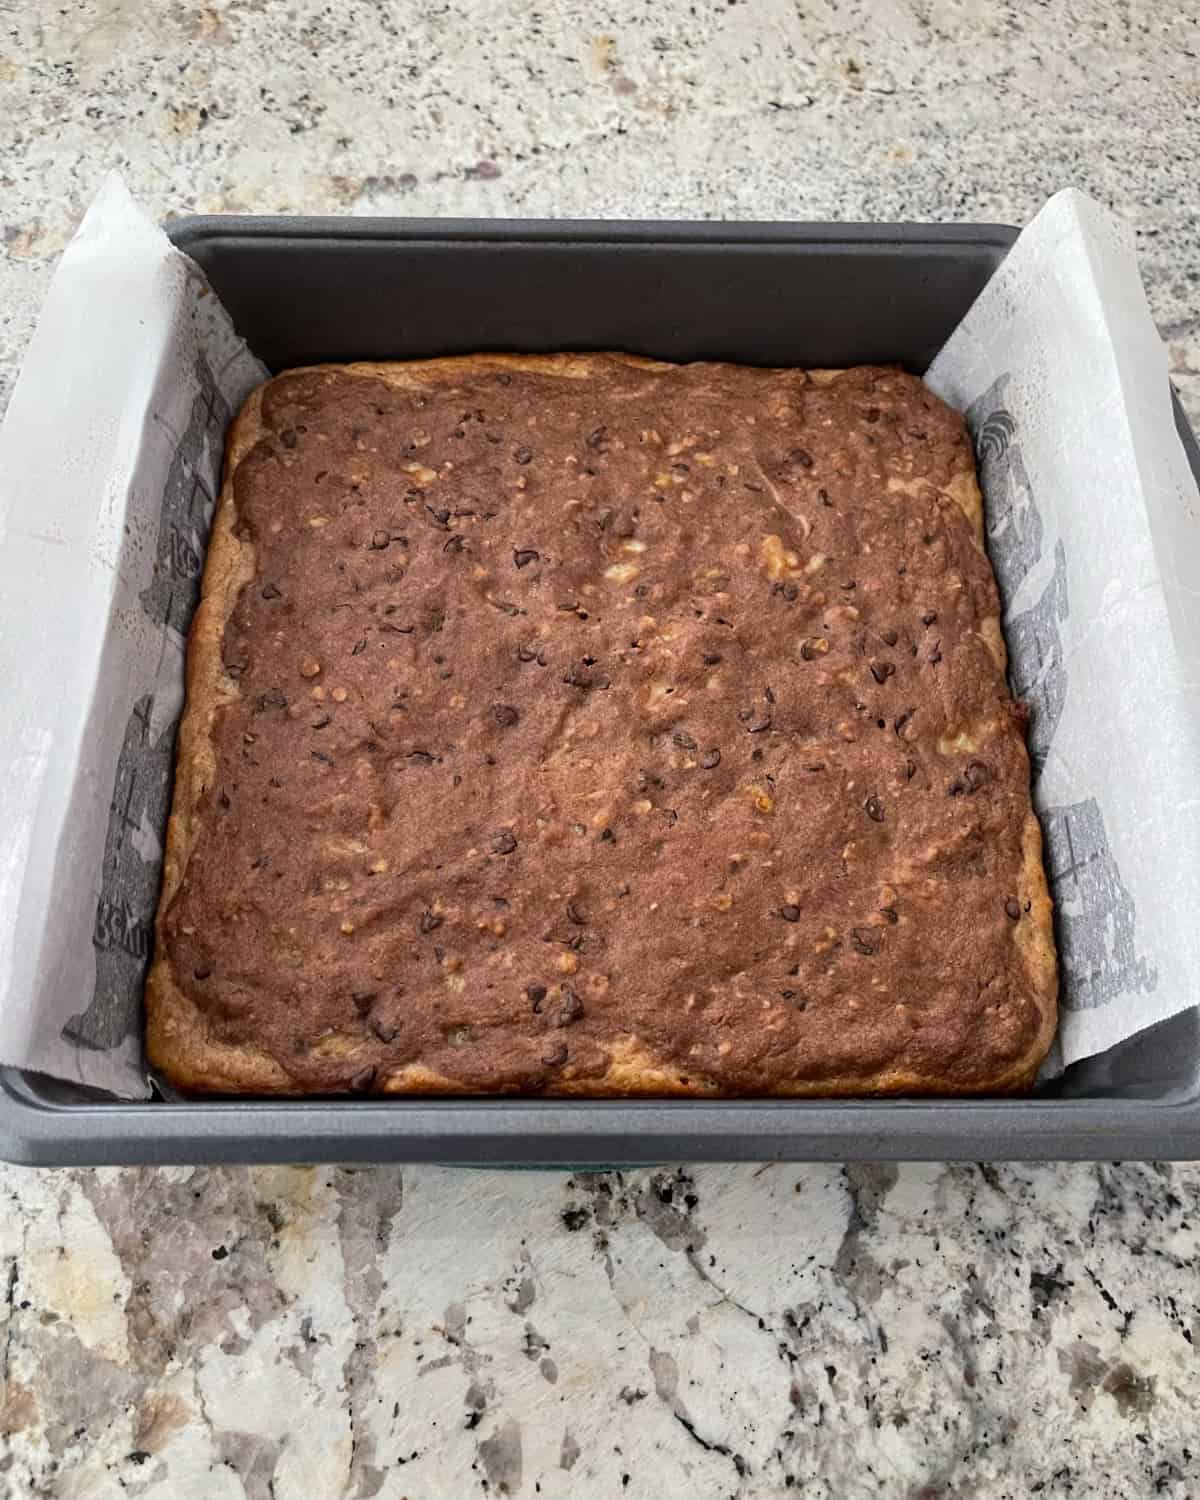 Banana bread brownies in parchment lined baking pan on granite counter top.